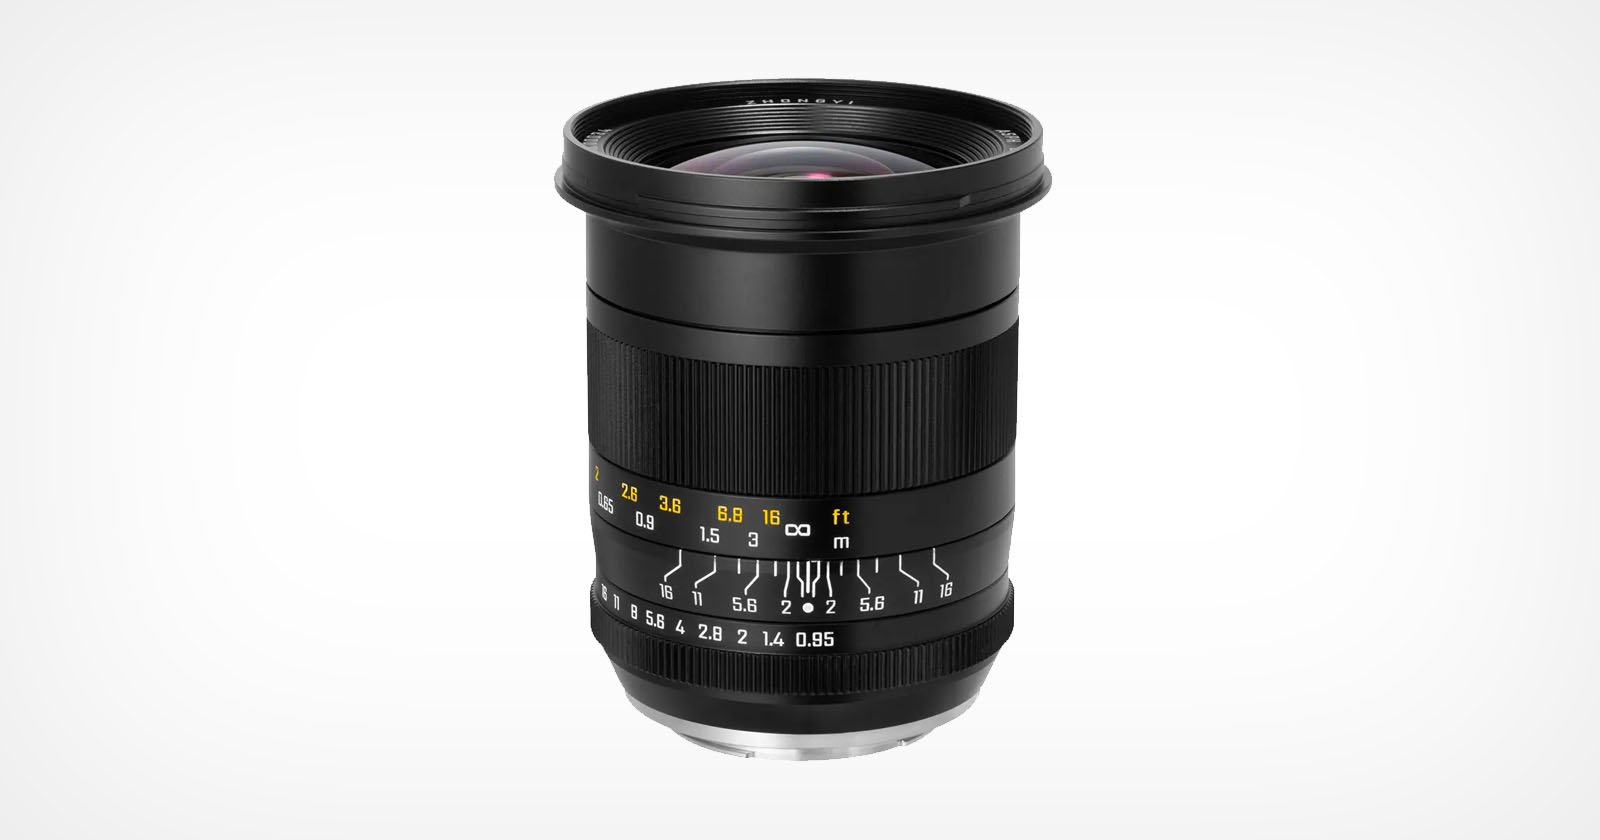 Zhongyi Re-Releases an APS-C 20mm f/0.95 Aimed at the Japanese Market